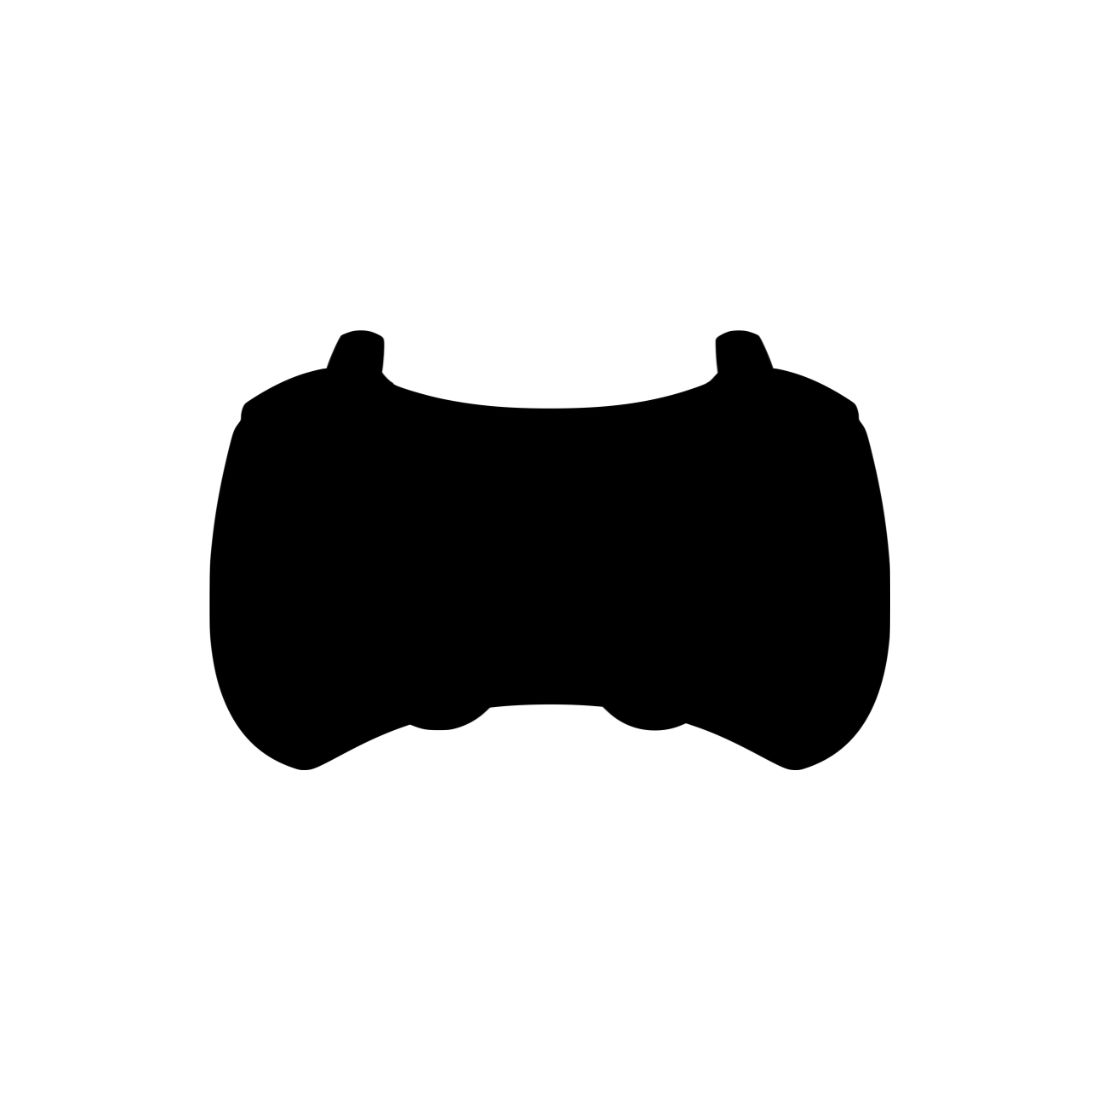 Game Controller Silhouette Bundles for your design.